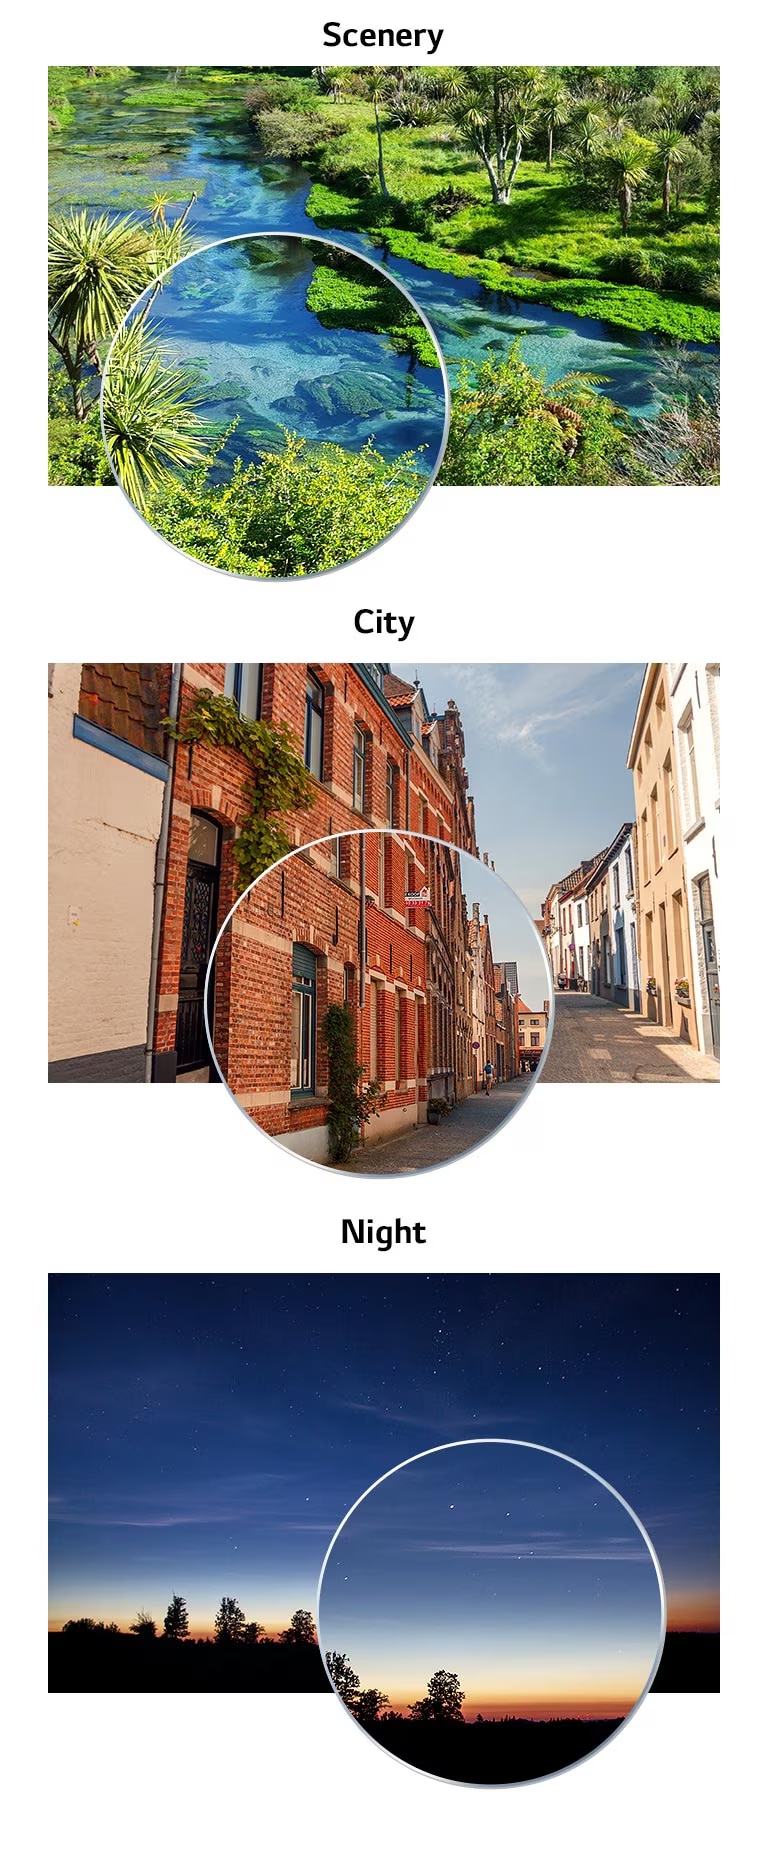 Comparison of picture quality by scene types which are scenery, city, night and other.